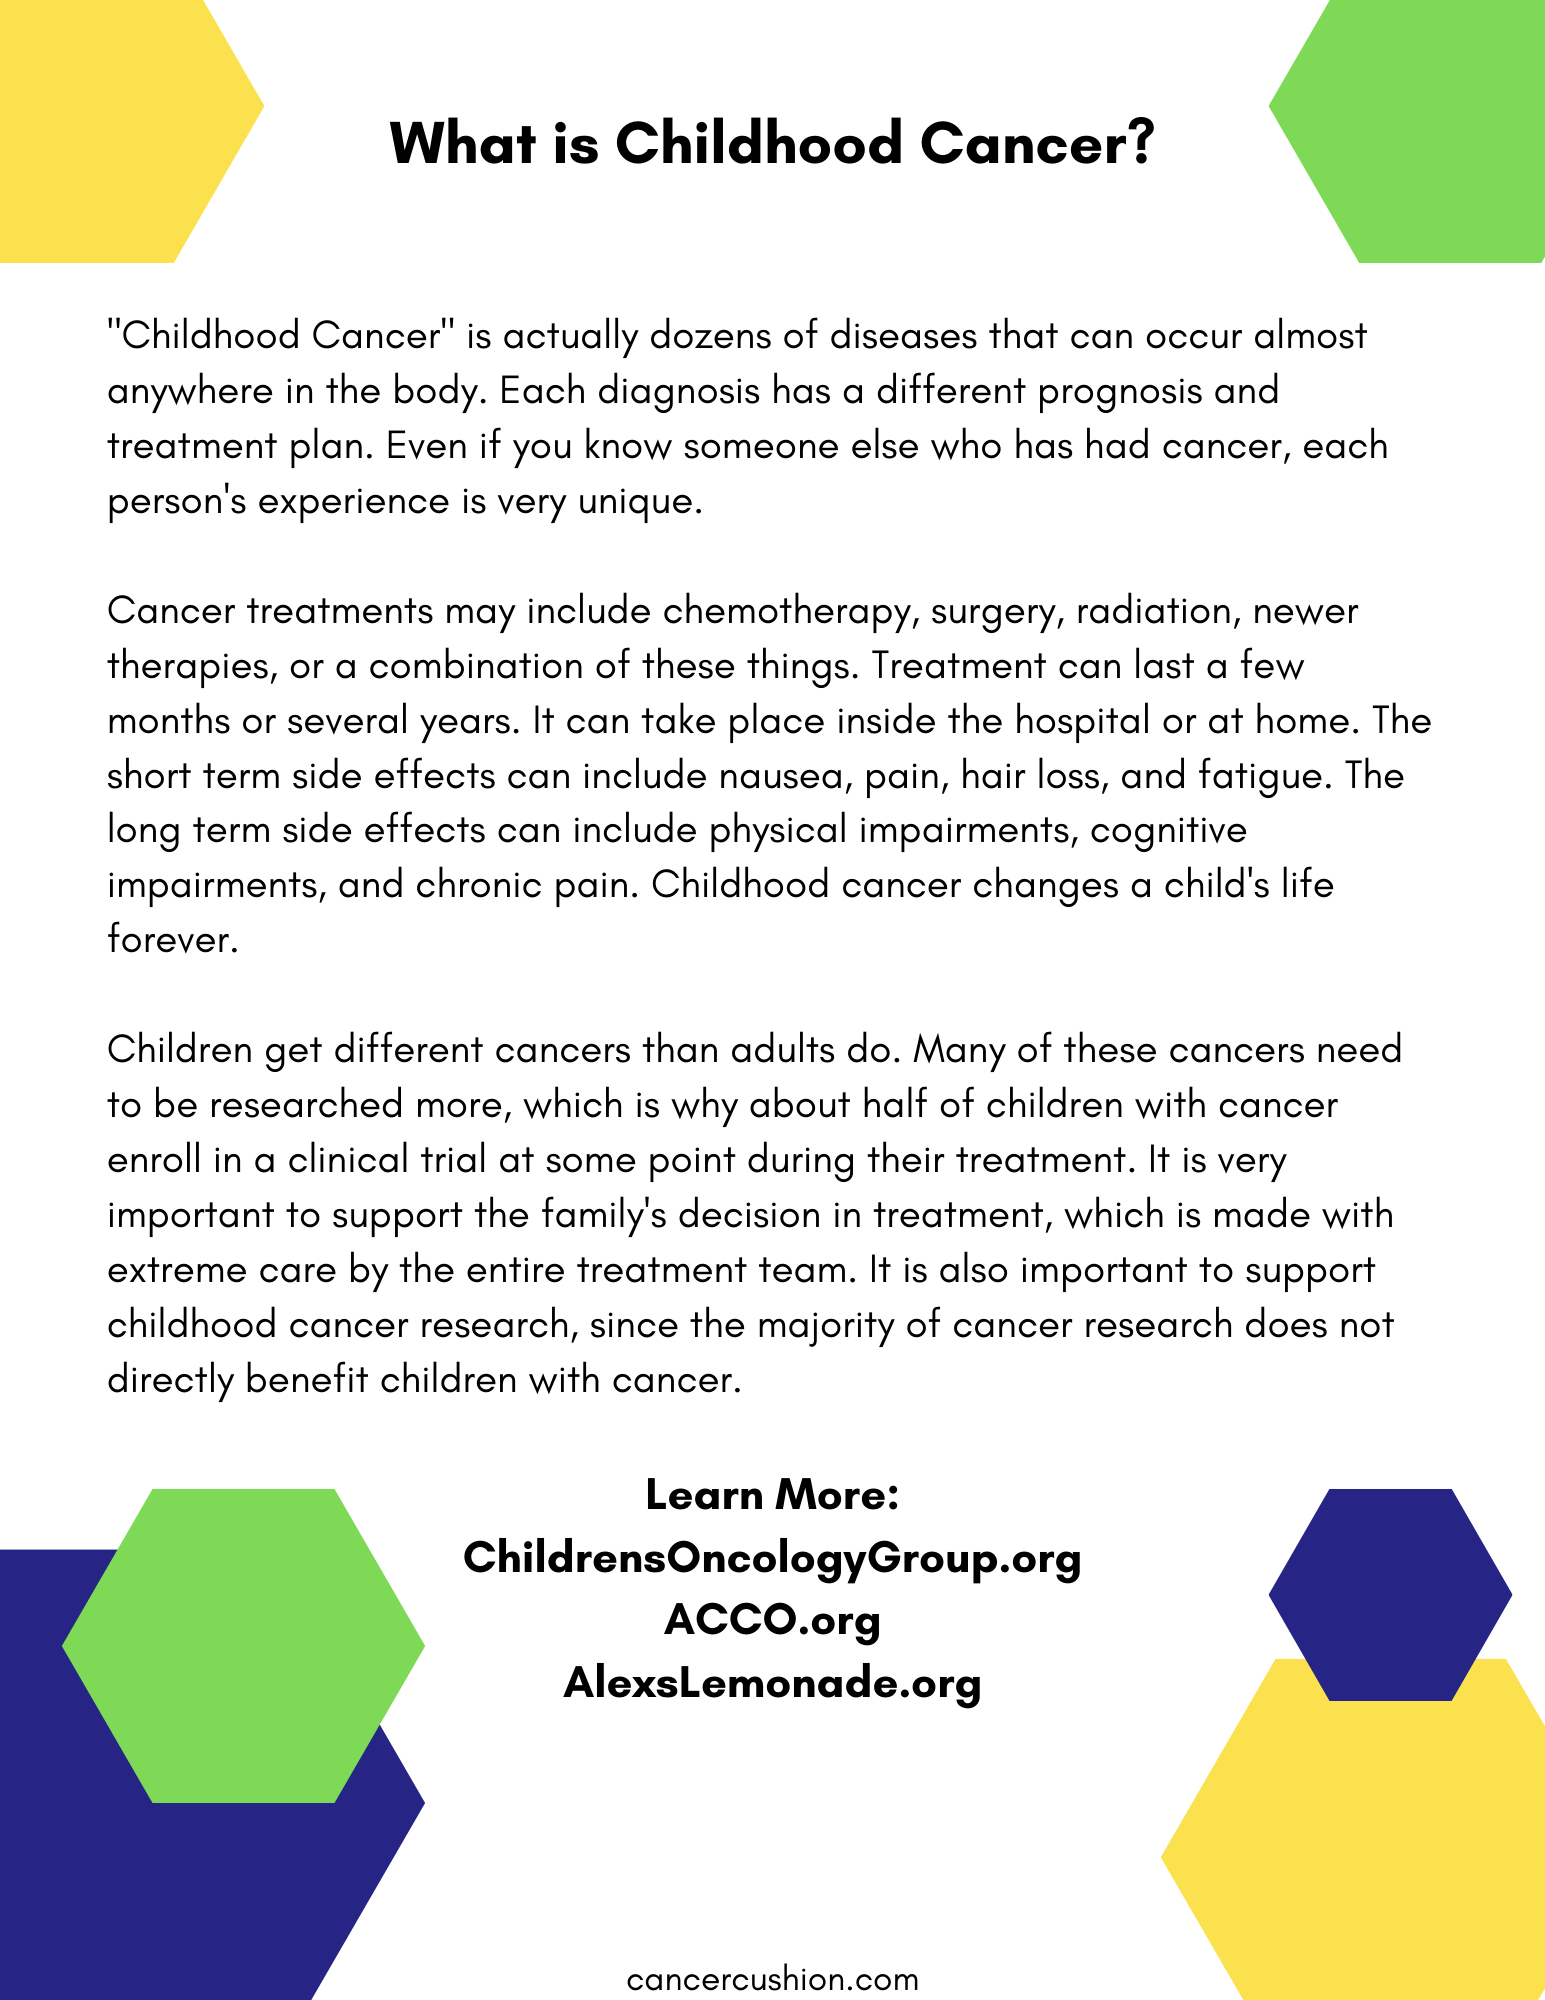 What is Childhood Cancer?